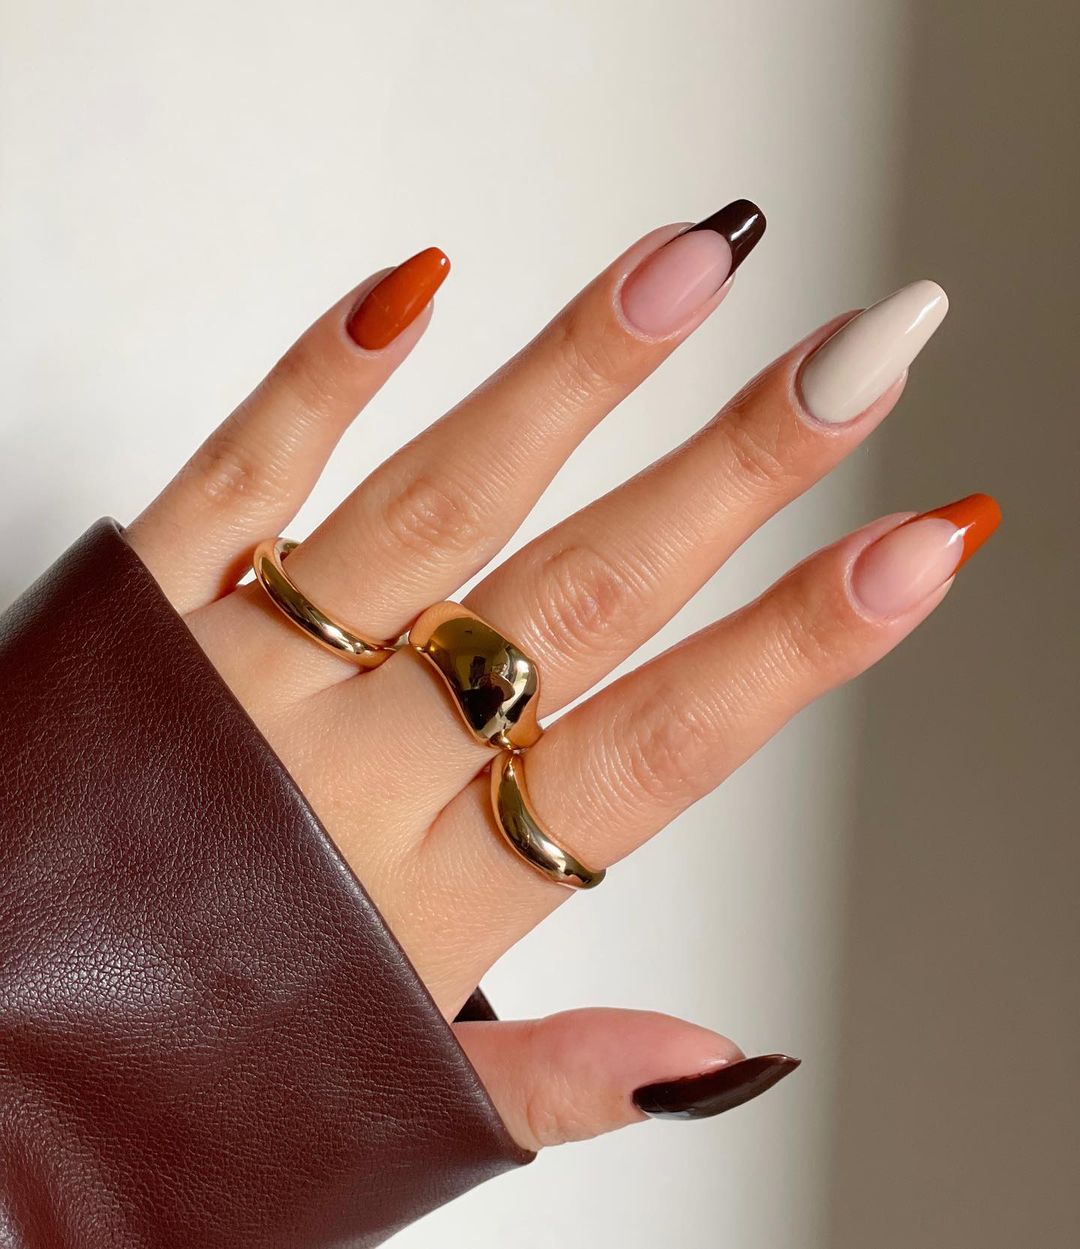 Top 10 Nail Design Ideas and Inspiration for Fall 2023 | Mismatched Autumn Manicure